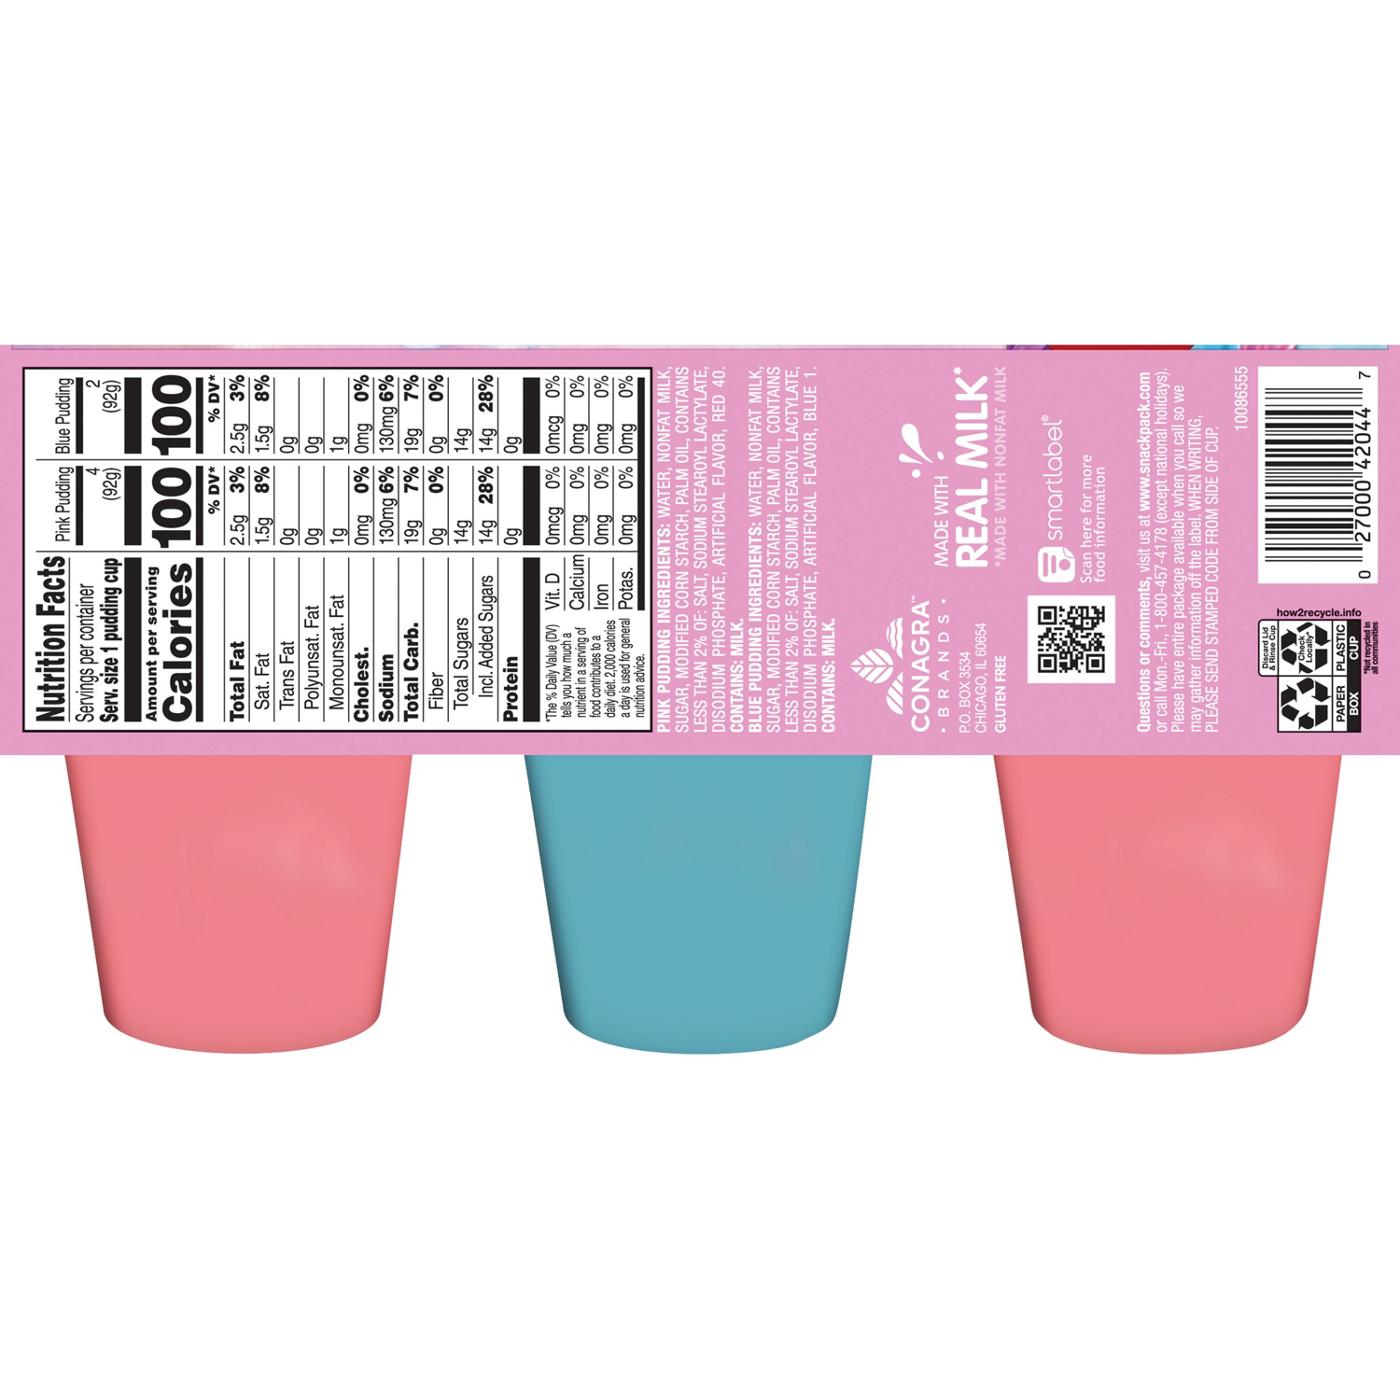 Snack Pack Unicorn Magic Pudding Cups; image 4 of 7